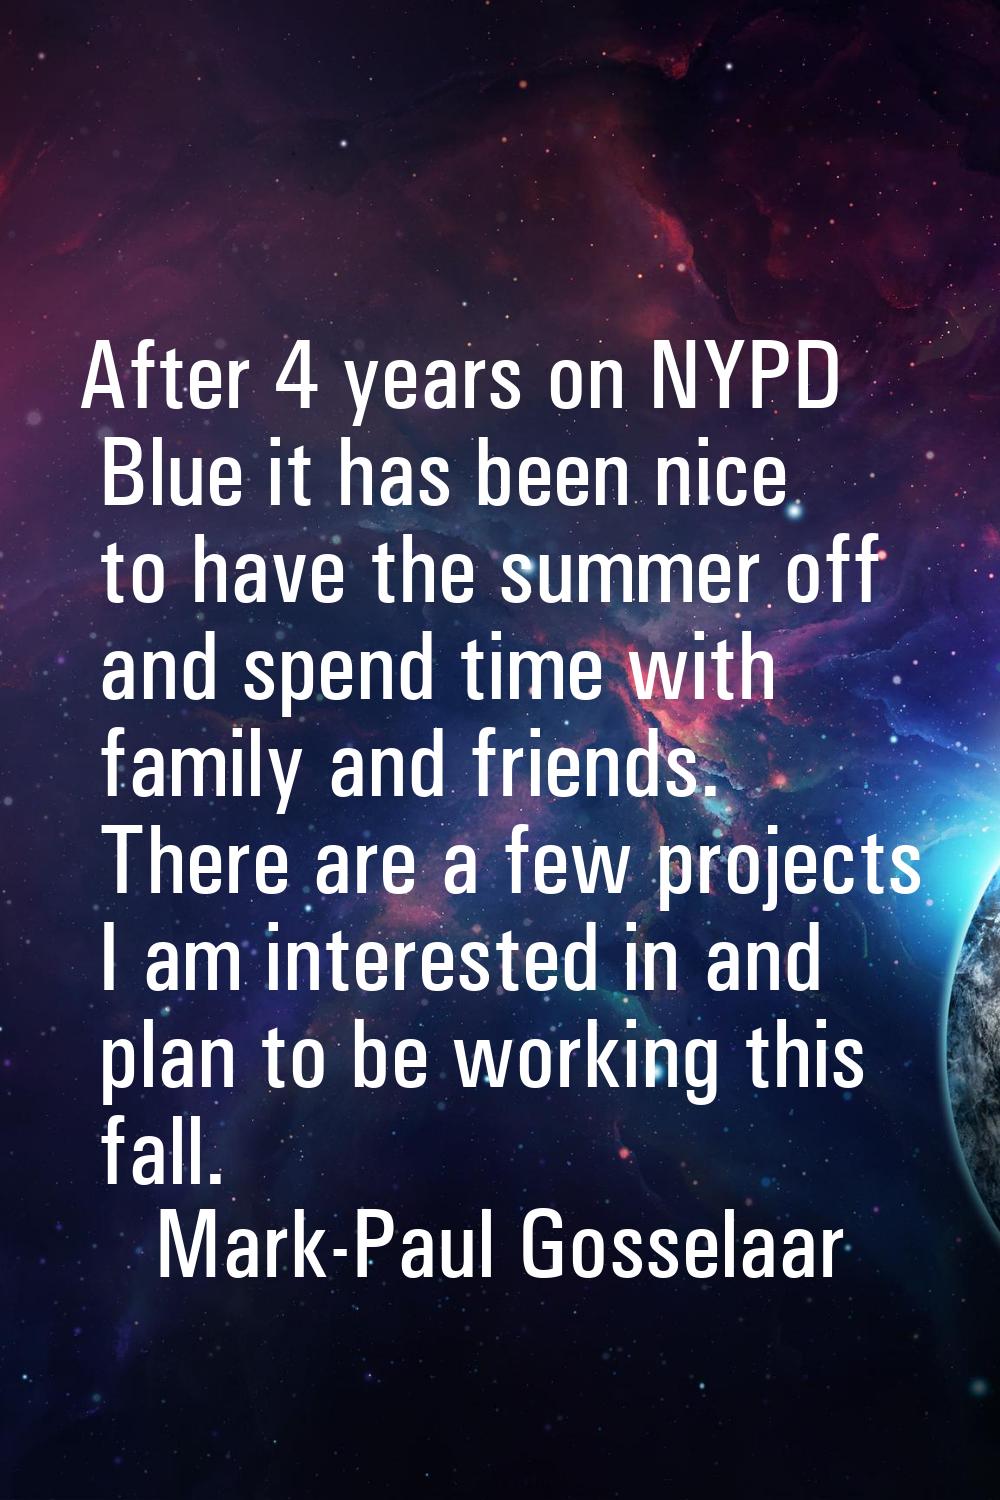 After 4 years on NYPD Blue it has been nice to have the summer off and spend time with family and f